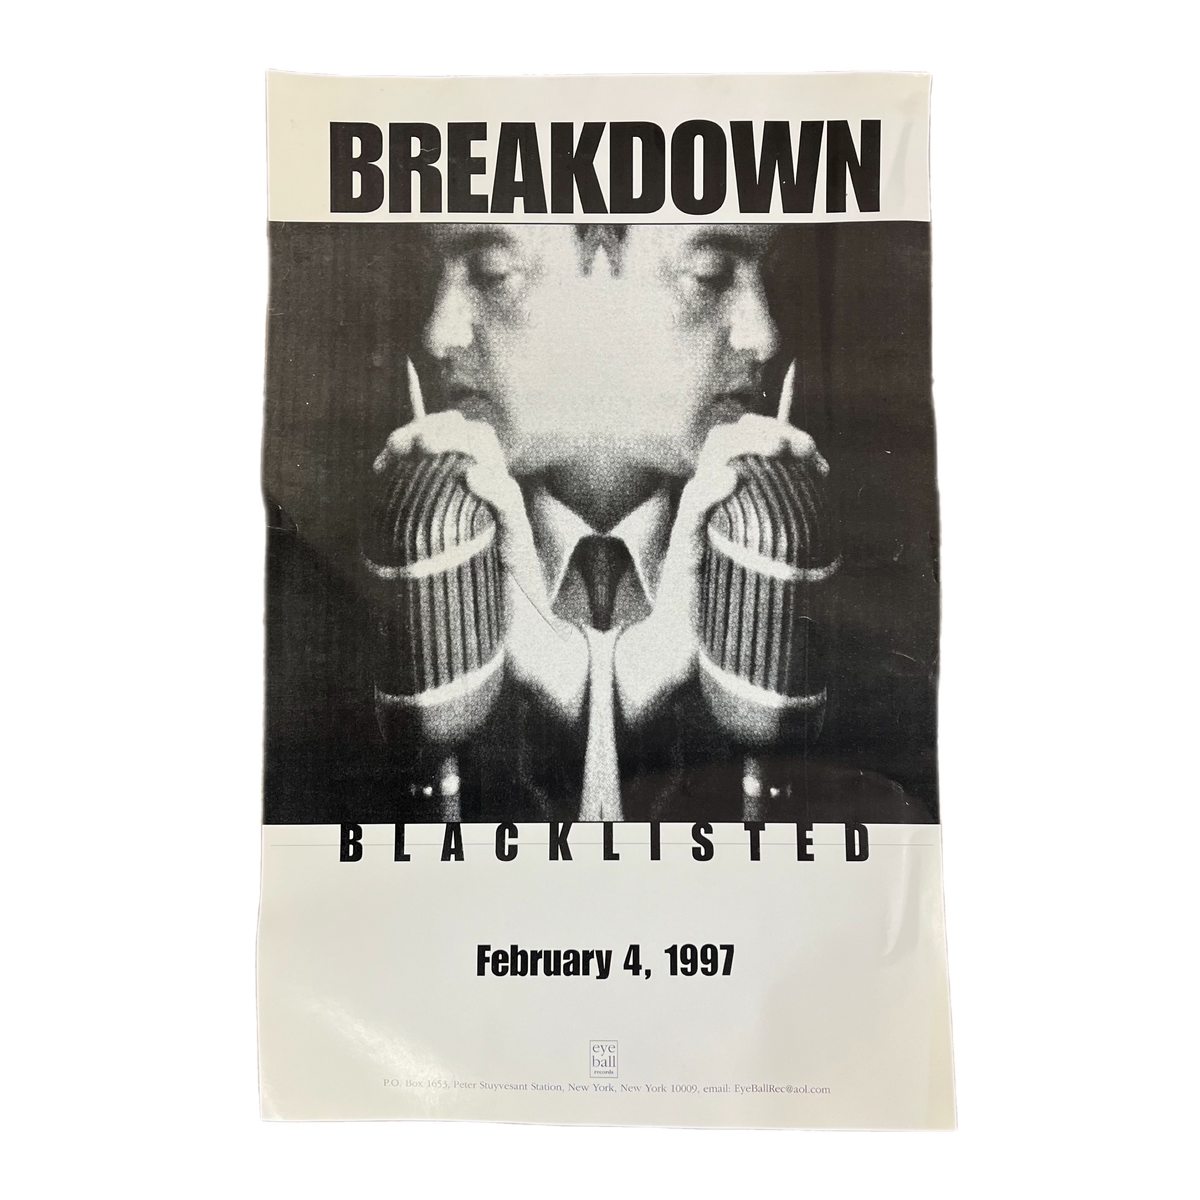 Vintage Breakdown &quot;Blacklisted&quot; Eyeball Records Promotional Poster